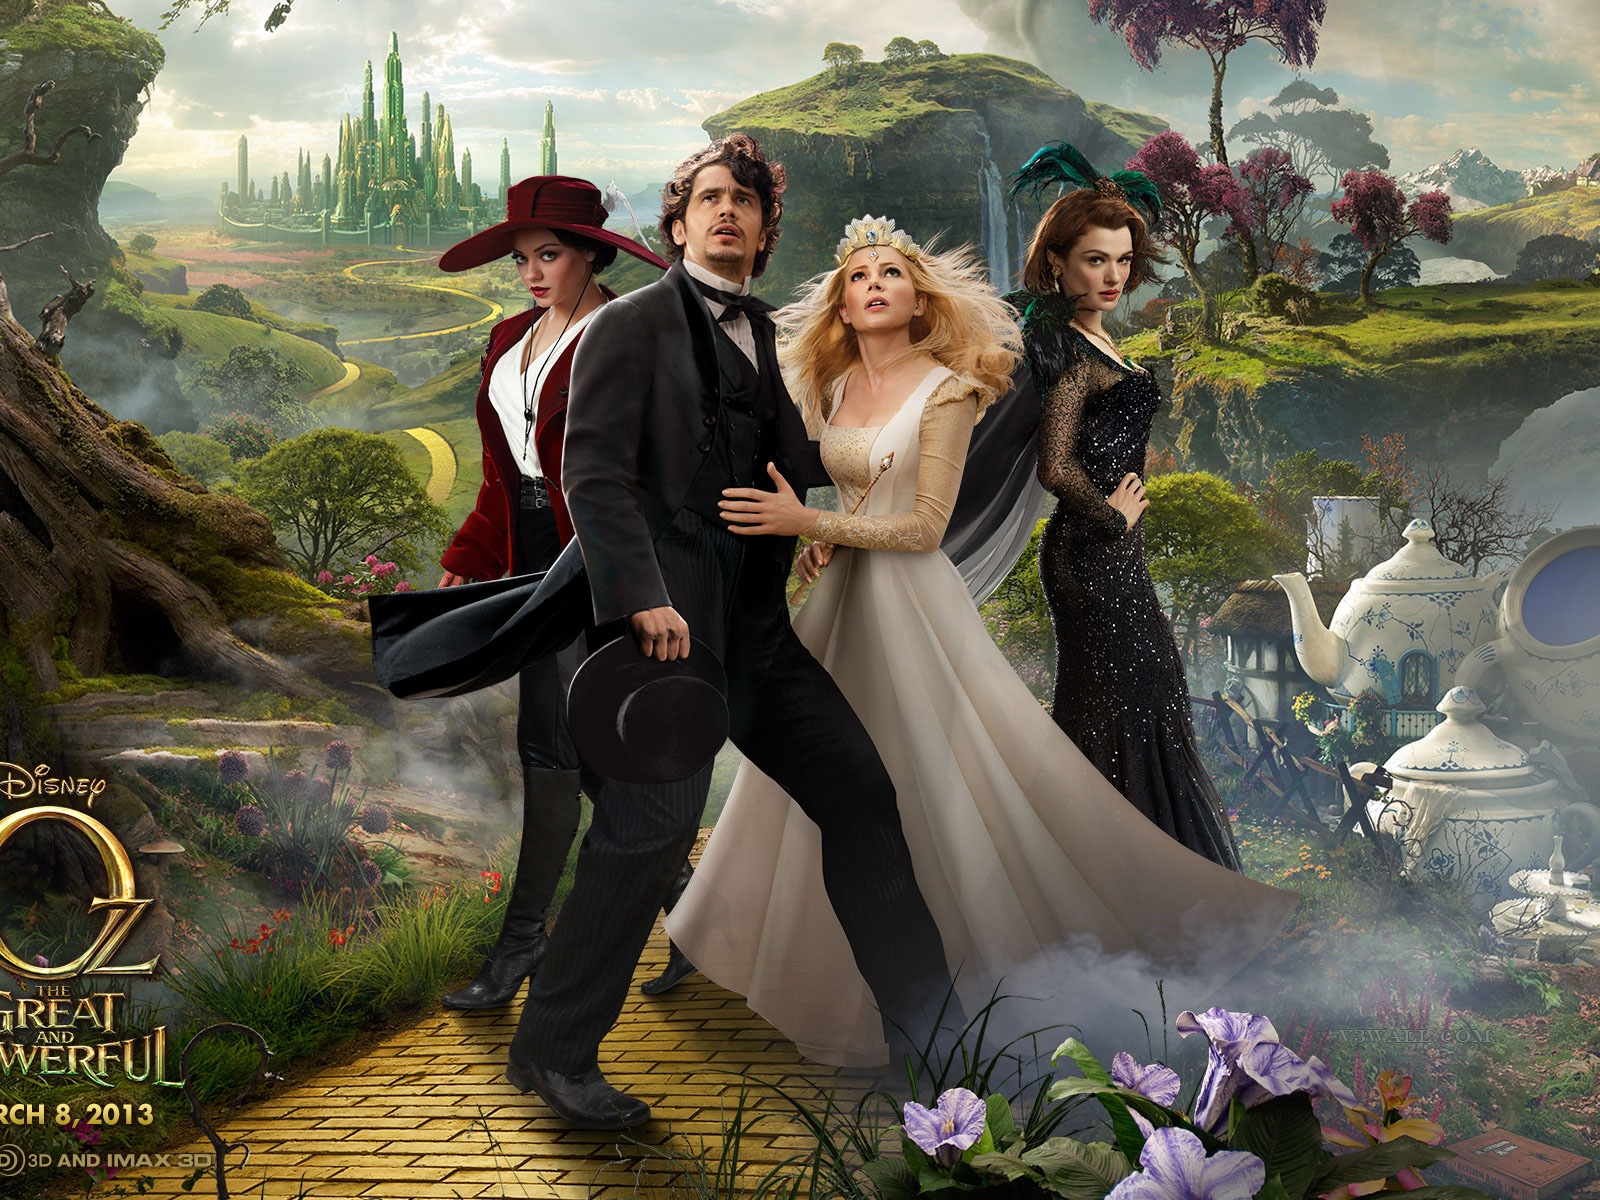 Oz The Great and Powerful 2013 HD wallpapers #1 - 1600x1200